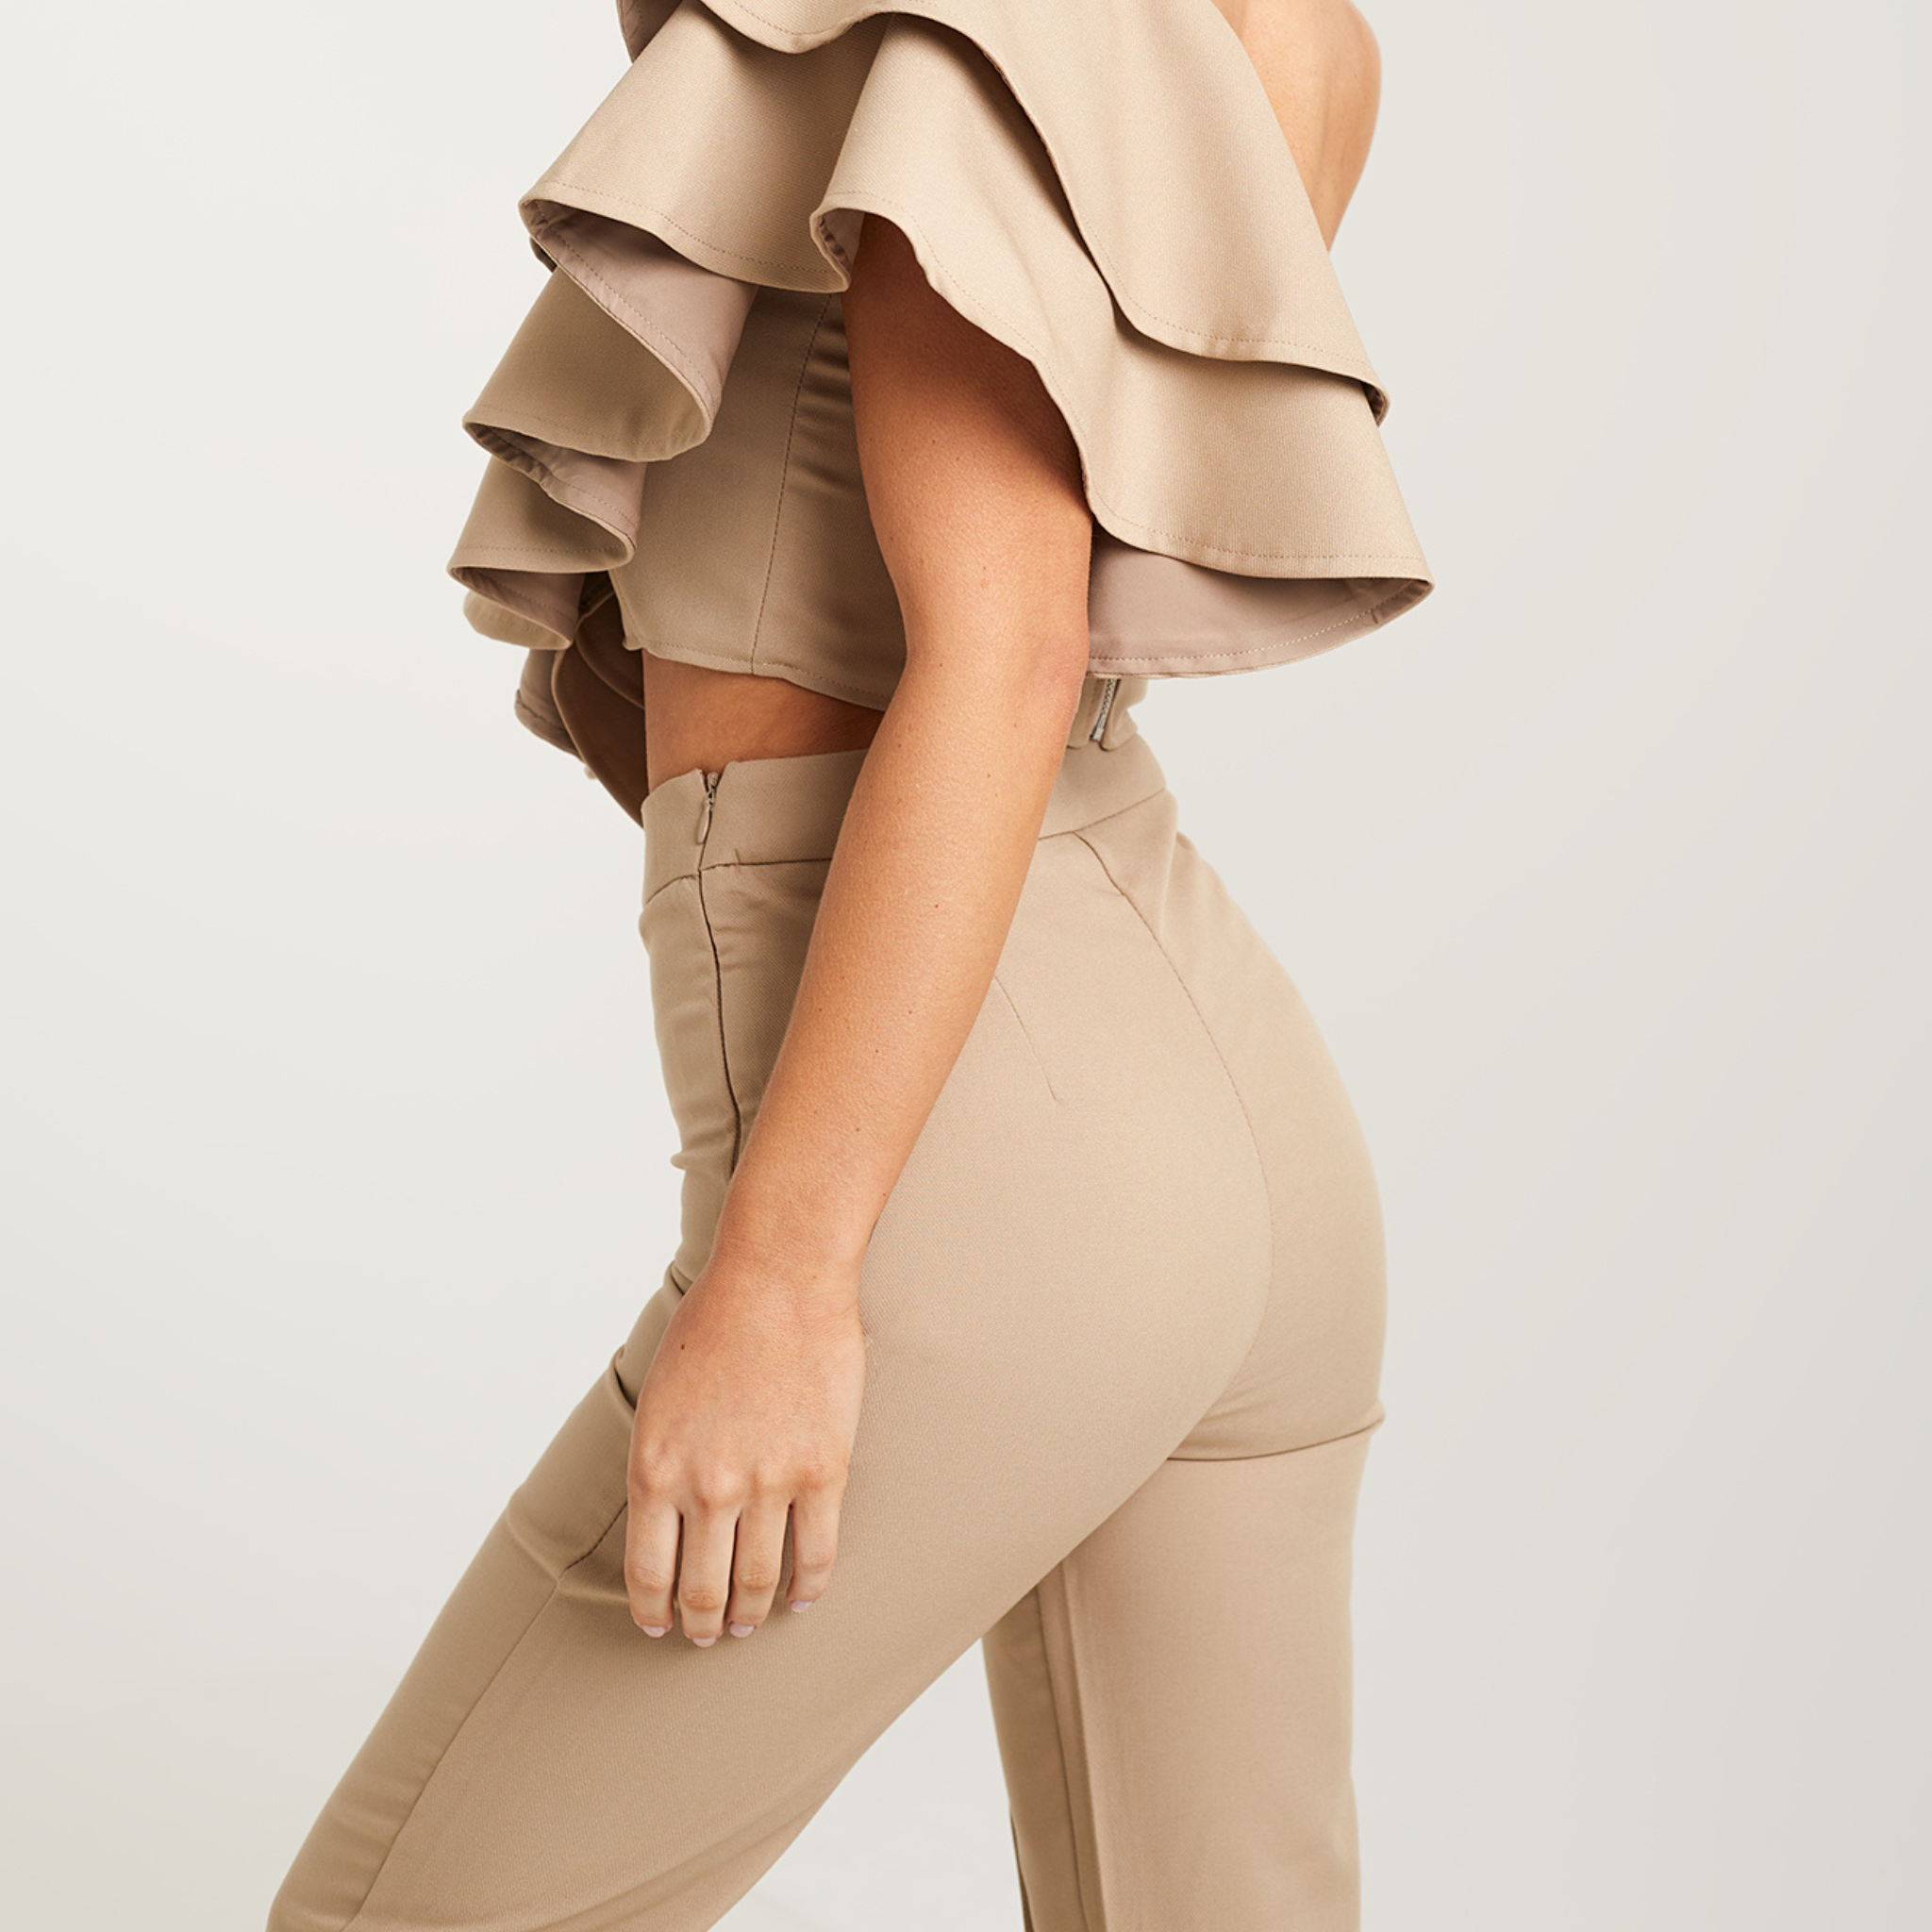 A pair of women's high-waisted, wide-leg suit trousers in a soft beige color. The trousers feature a tailored fit and sit comfortably at the waist, accentuating the feminine silhouette. The wide legs gracefully flow down, creating a sophisticated and elegant look. The neutral beige tone adds a timeless touch to the ensemble, making these trousers versatile for various occasions. 